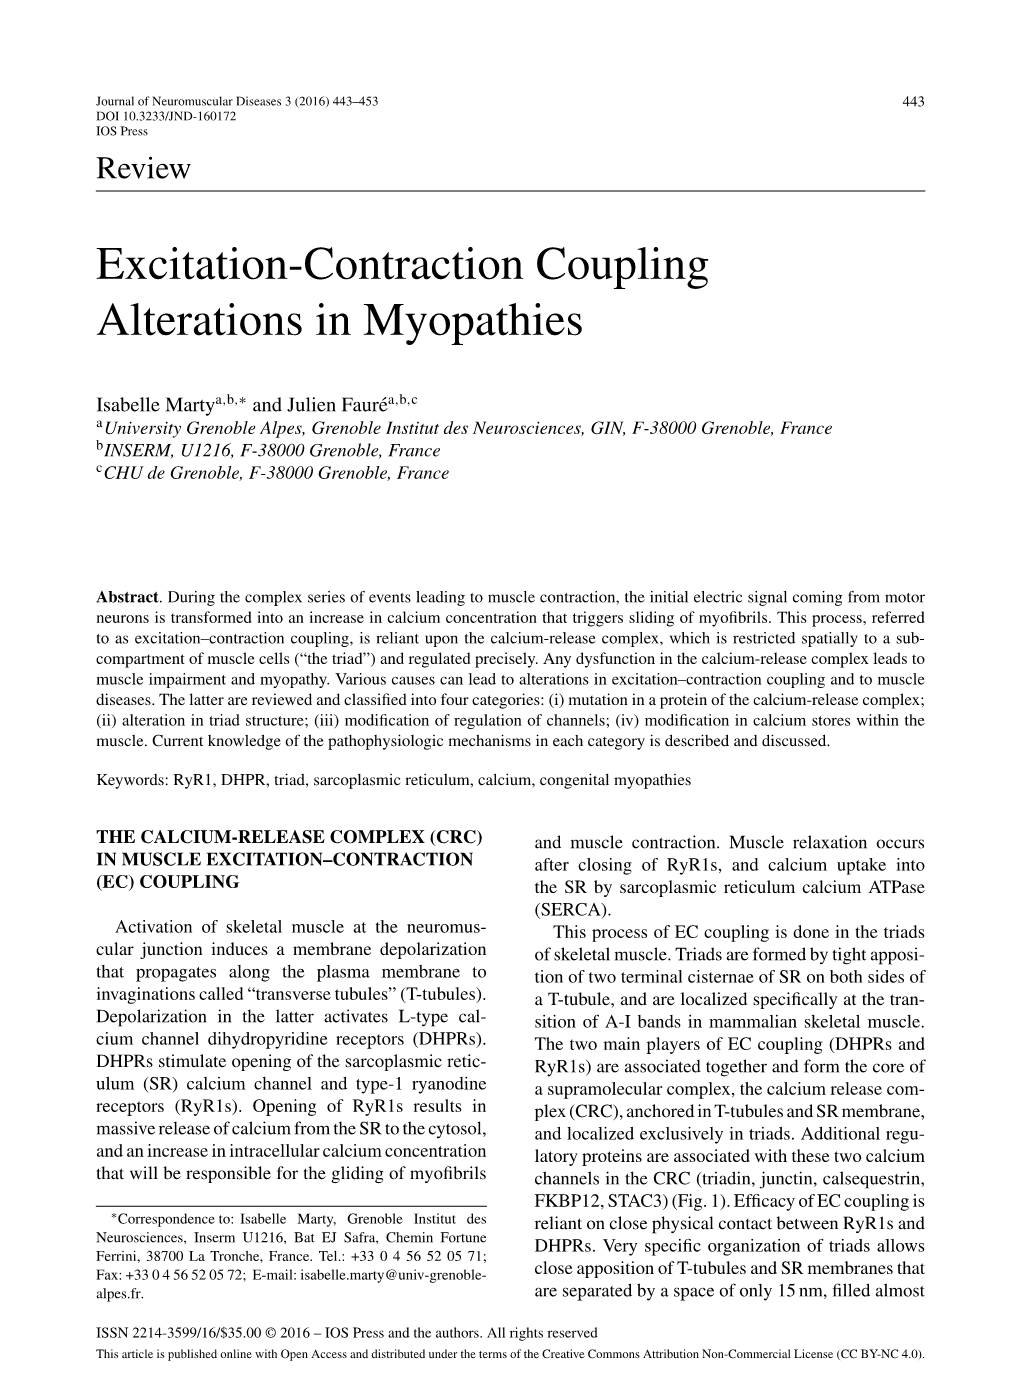 Excitation-Contraction Coupling Alterations in Myopathies